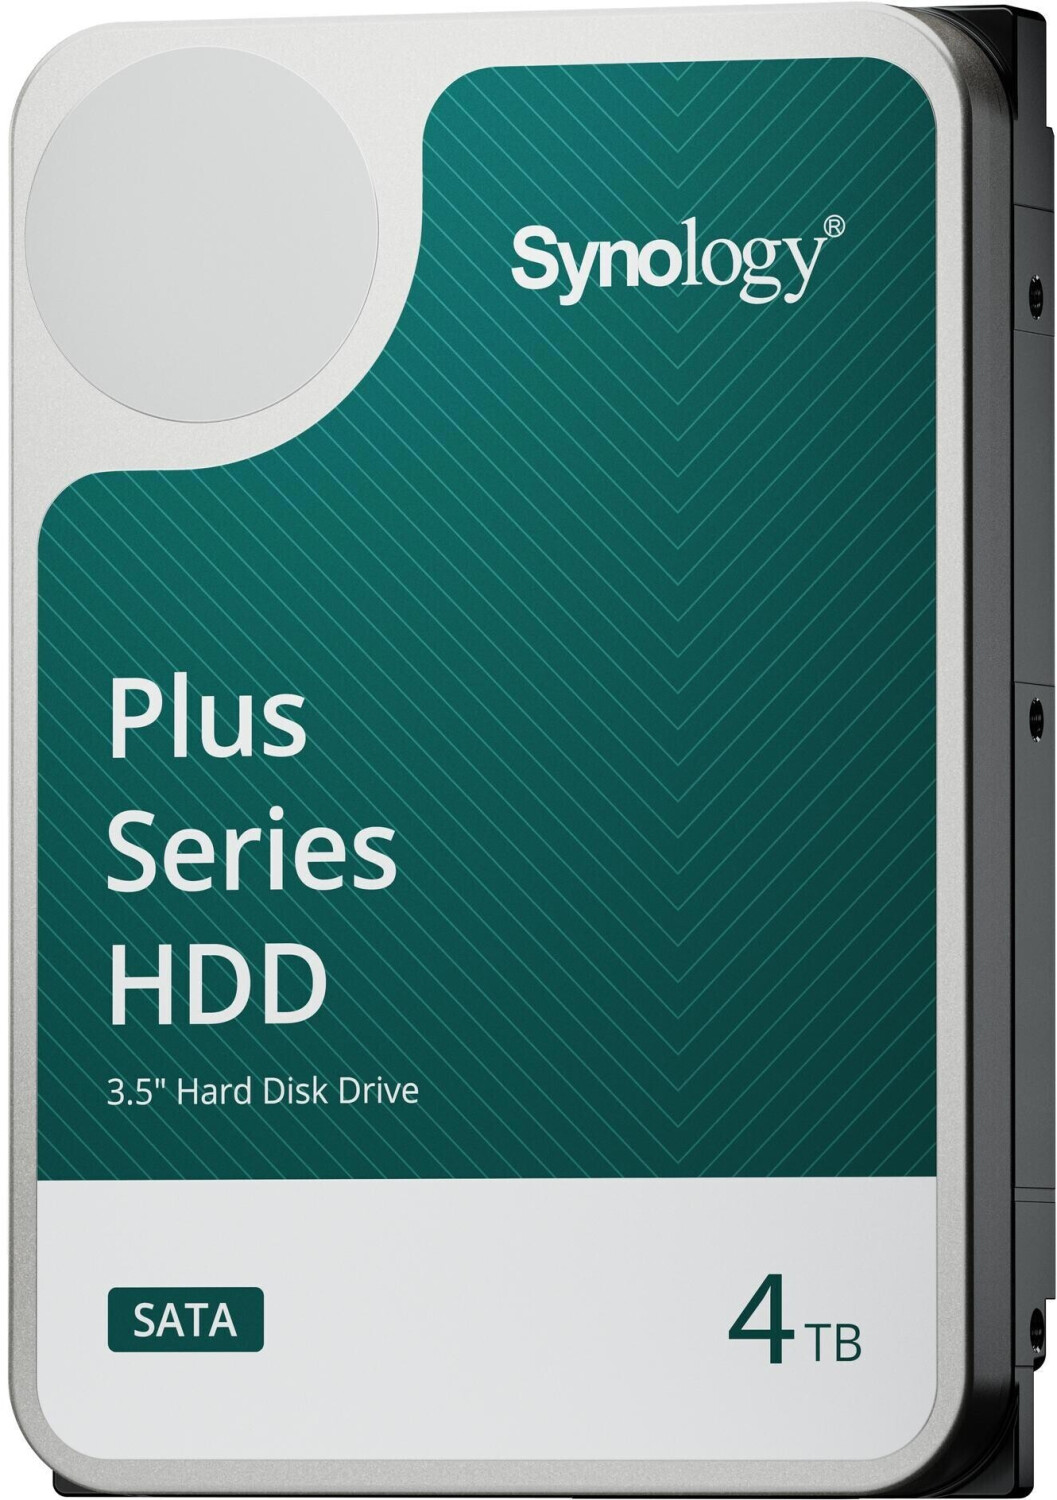 Synology HAT5300-12T, 12 To, Disque dur SATA/600